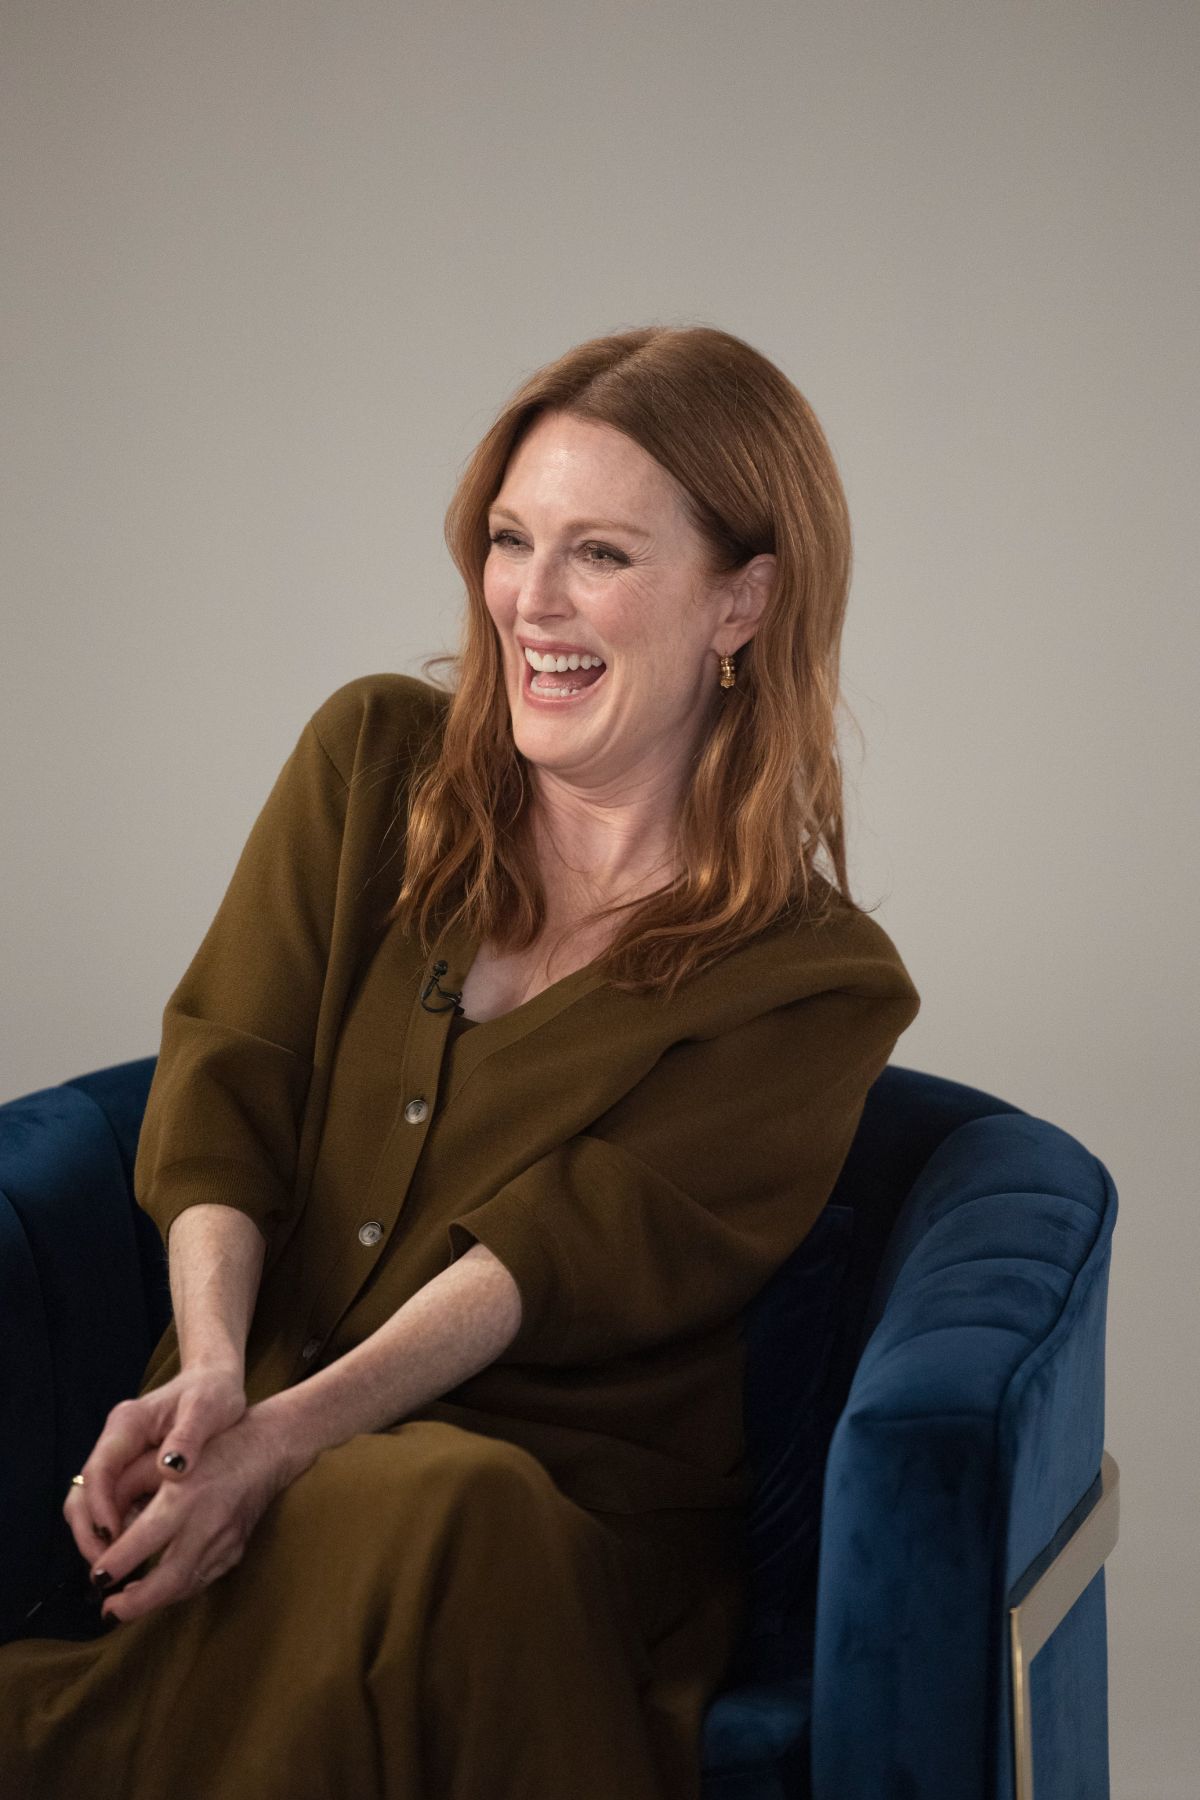 Julianne Moore and Annette Bening Shine in Variety